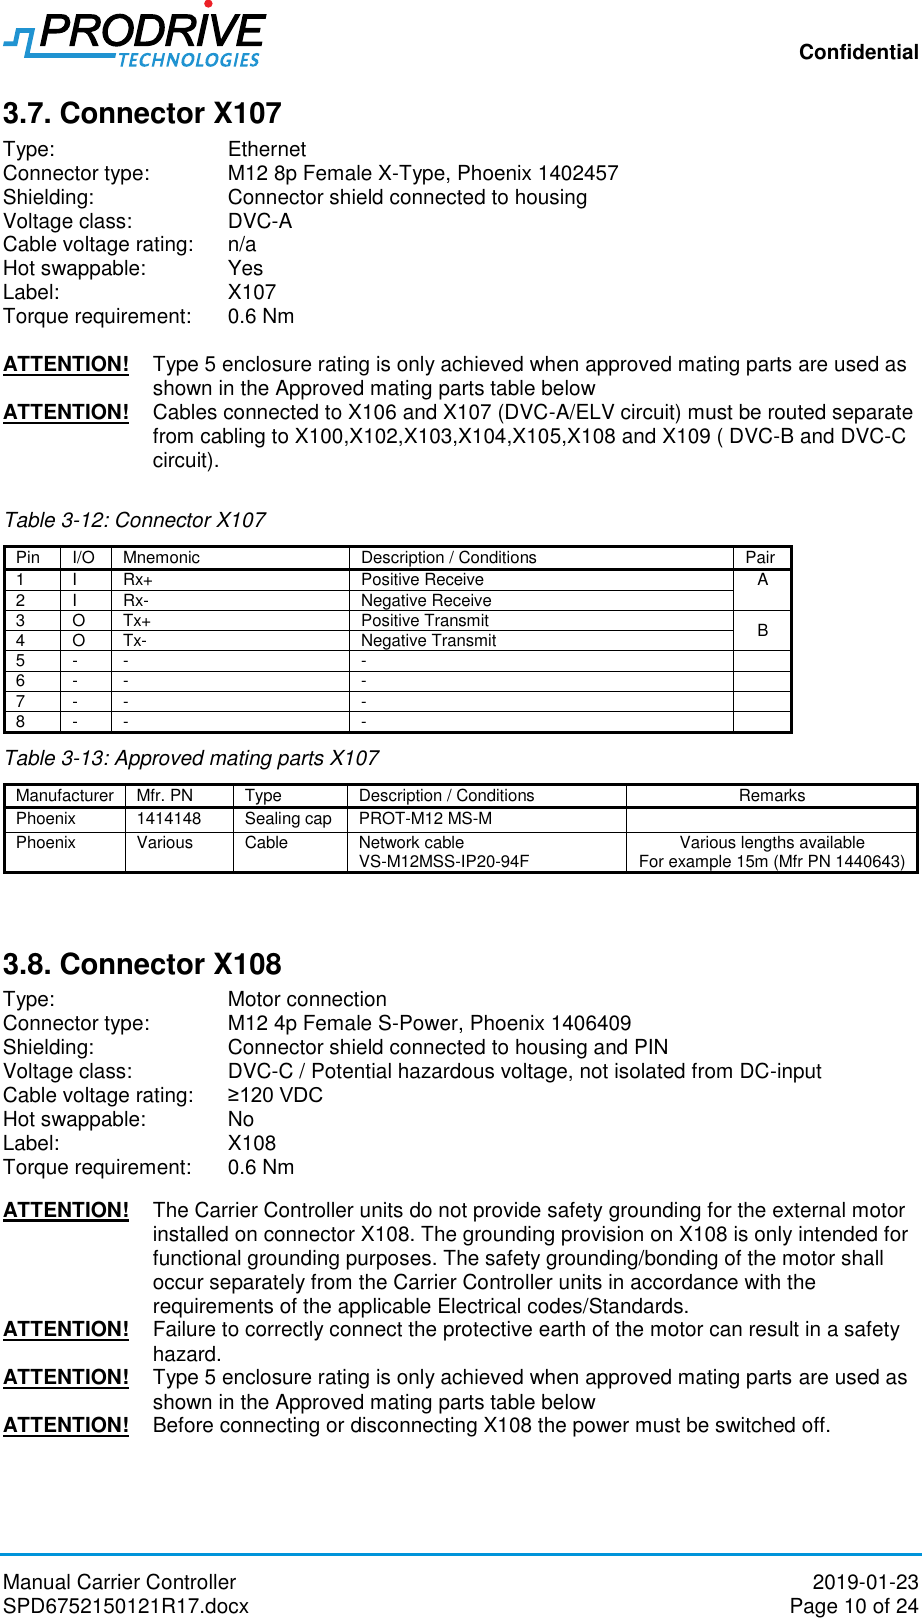 Confidential Manual Carrier Controller  2019-01-23 SPD6752150121R17.docx  Page 10 of 24 3.7. Connector X107 Type:       Ethernet Connector type:   M12 8p Female X-Type, Phoenix 1402457 Shielding:    Connector shield connected to housing Voltage class:    DVC-A Cable voltage rating:   n/a Hot swappable:   Yes Label:       X107 Torque requirement:  0.6 Nm  ATTENTION!  Type 5 enclosure rating is only achieved when approved mating parts are used as shown in the Approved mating parts table below  ATTENTION!  Cables connected to X106 and X107 (DVC-A/ELV circuit) must be routed separate from cabling to X100,X102,X103,X104,X105,X108 and X109 ( DVC-B and DVC-C circuit).  Table 3-12: Connector X107 Pin I/O Mnemonic Description / Conditions Pair 1 I Rx+ Positive Receive A 2 I Rx- Negative Receive 3 O Tx+ Positive Transmit B 4 O Tx- Negative Transmit 5 - - -  6 - - -  7 - - -  8 - - -  Table 3-13: Approved mating parts X107   3.8. Connector X108 Type:       Motor connection Connector type:   M12 4p Female S-Power, Phoenix 1406409 Shielding:    Connector shield connected to housing and PIN Voltage class:    DVC-C / Potential hazardous voltage, not isolated from DC-input Cable voltage rating:   ≥120 VDC Hot swappable:   No Label:       X108 Torque requirement:  0.6 Nm  ATTENTION!   The Carrier Controller units do not provide safety grounding for the external motor installed on connector X108. The grounding provision on X108 is only intended for functional grounding purposes. The safety grounding/bonding of the motor shall occur separately from the Carrier Controller units in accordance with the requirements of the applicable Electrical codes/Standards. ATTENTION!   Failure to correctly connect the protective earth of the motor can result in a safety hazard. ATTENTION!  Type 5 enclosure rating is only achieved when approved mating parts are used as shown in the Approved mating parts table below  ATTENTION!  Before connecting or disconnecting X108 the power must be switched off.  Manufacturer Mfr. PN Type Description / Conditions Remarks Phoenix 1414148 Sealing cap PROT-M12 MS-M  Phoenix Various Cable Network cable  VS-M12MSS-IP20-94F Various lengths available For example 15m (Mfr PN 1440643)  